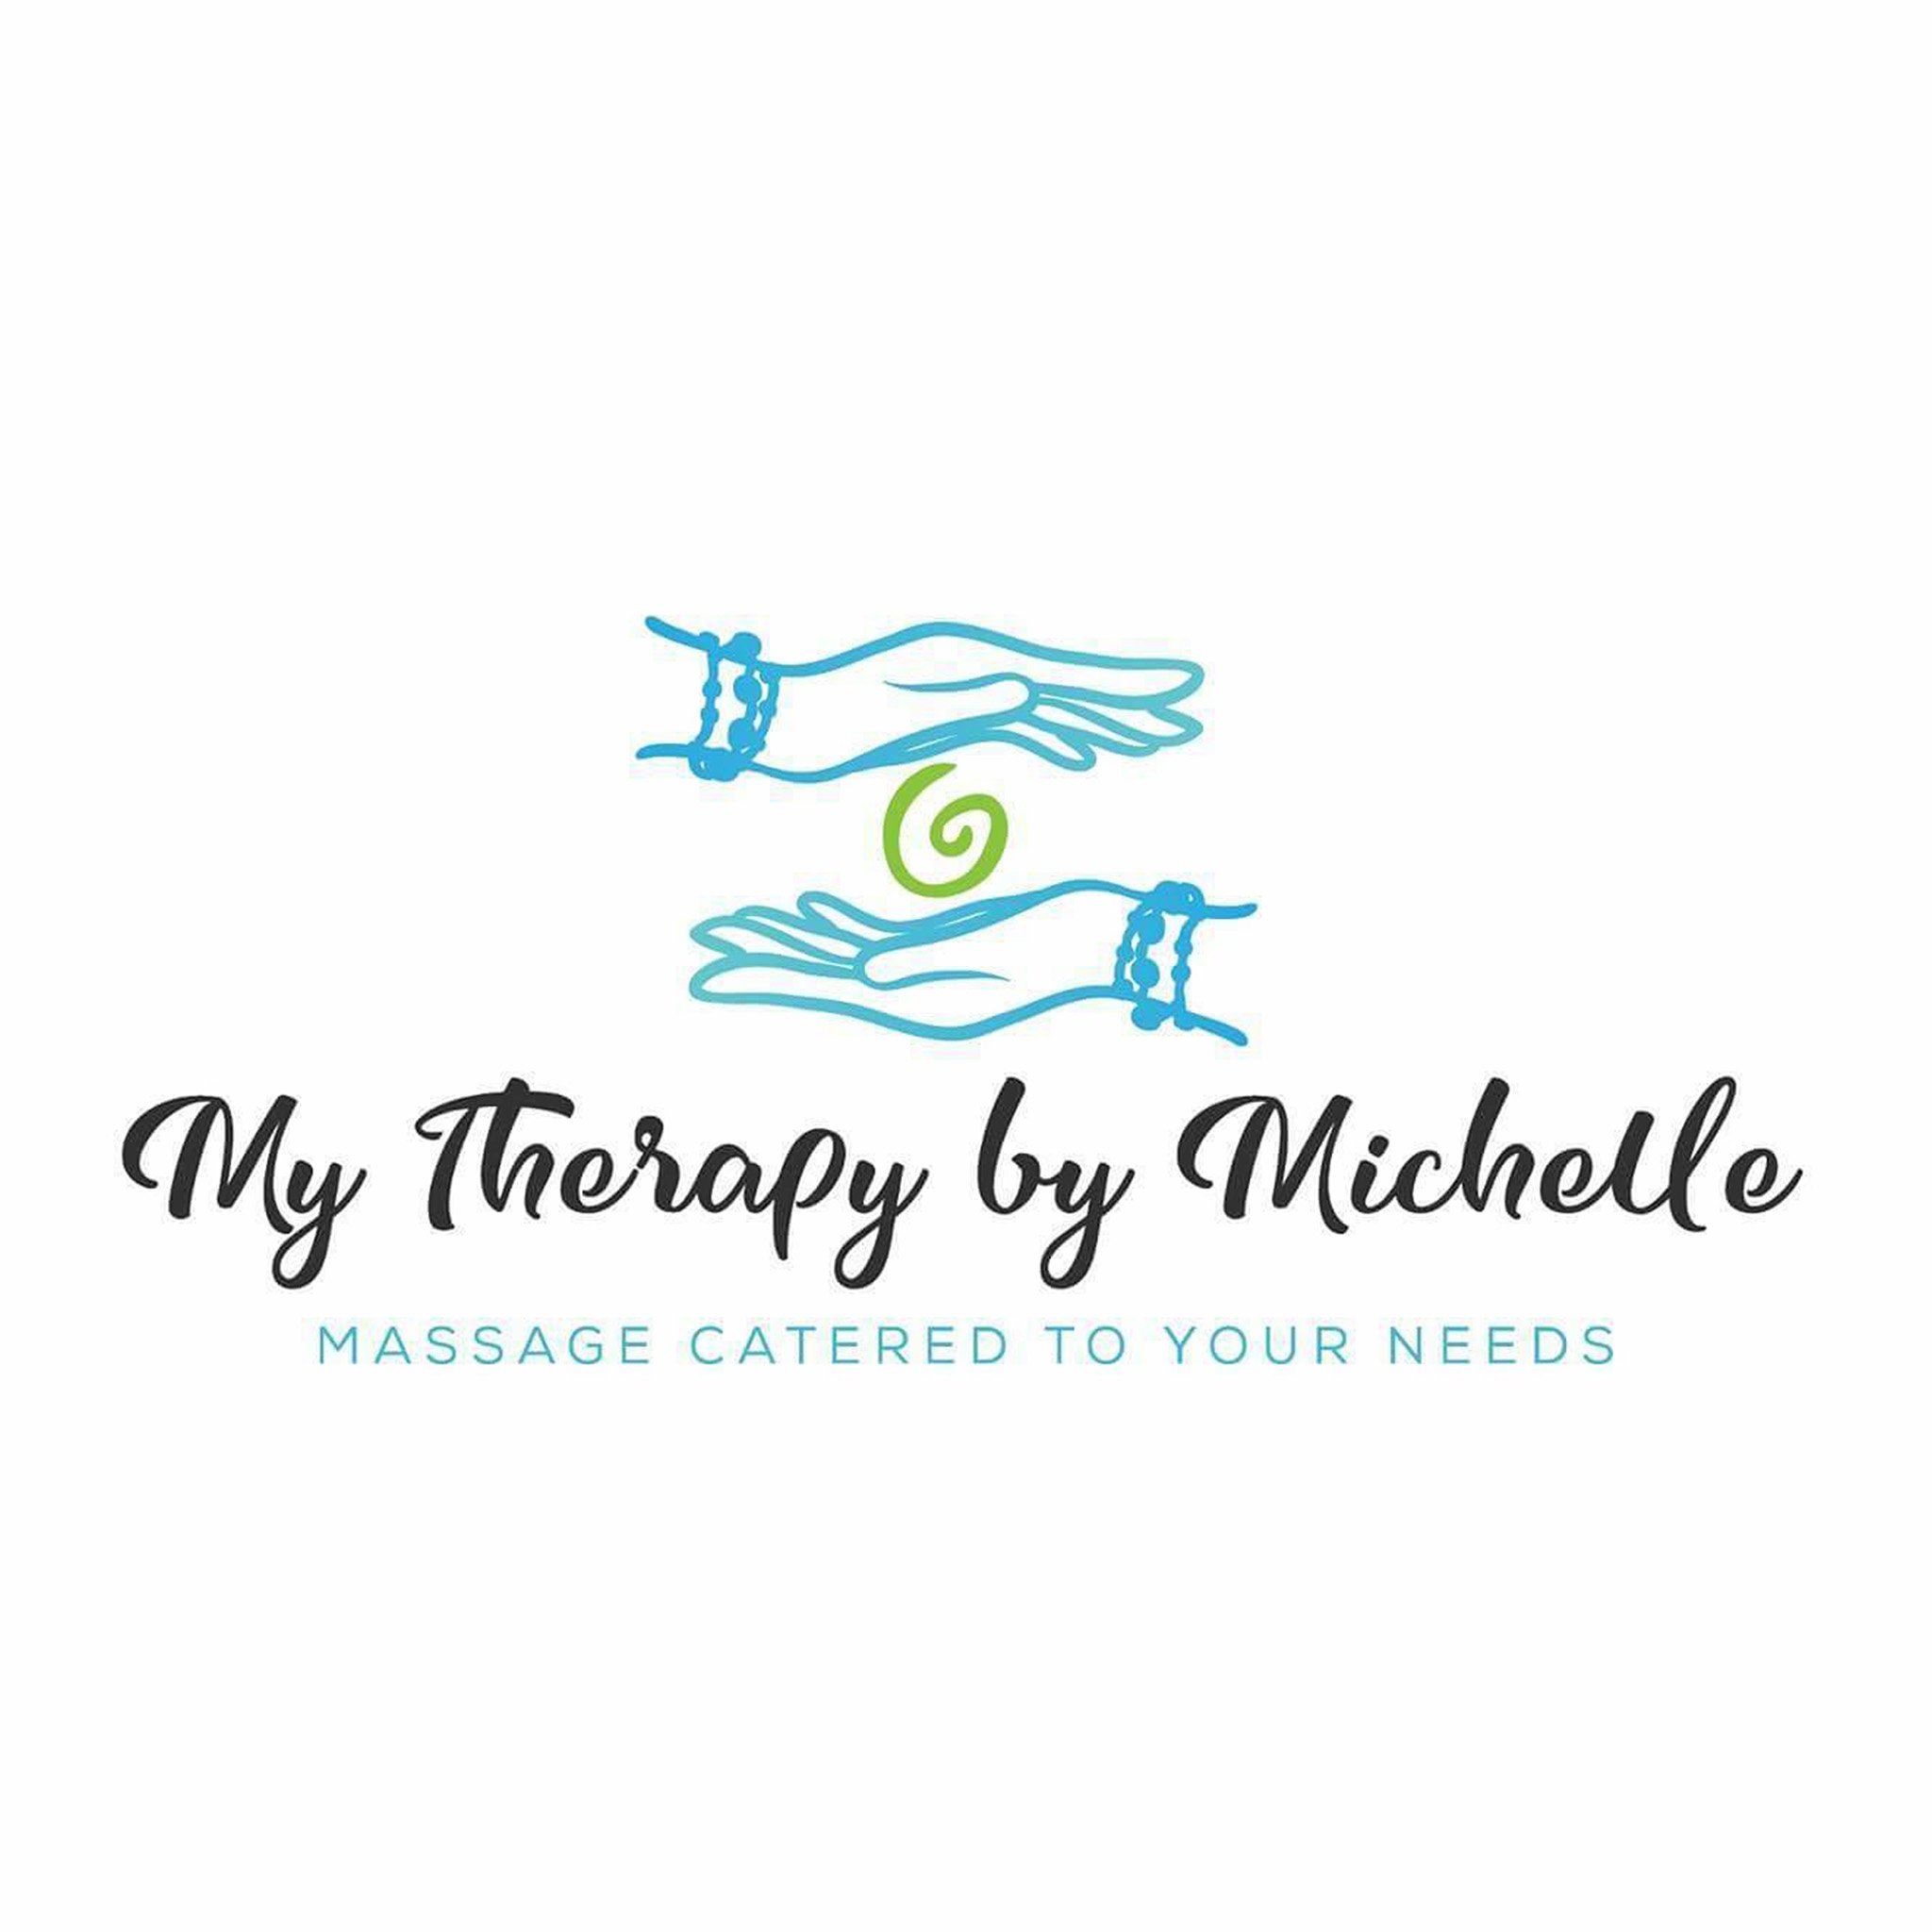 At My Therapy by Michelle, you can experience total relaxation through high-quality, health-focused massage treatments tailored to your unique needs.